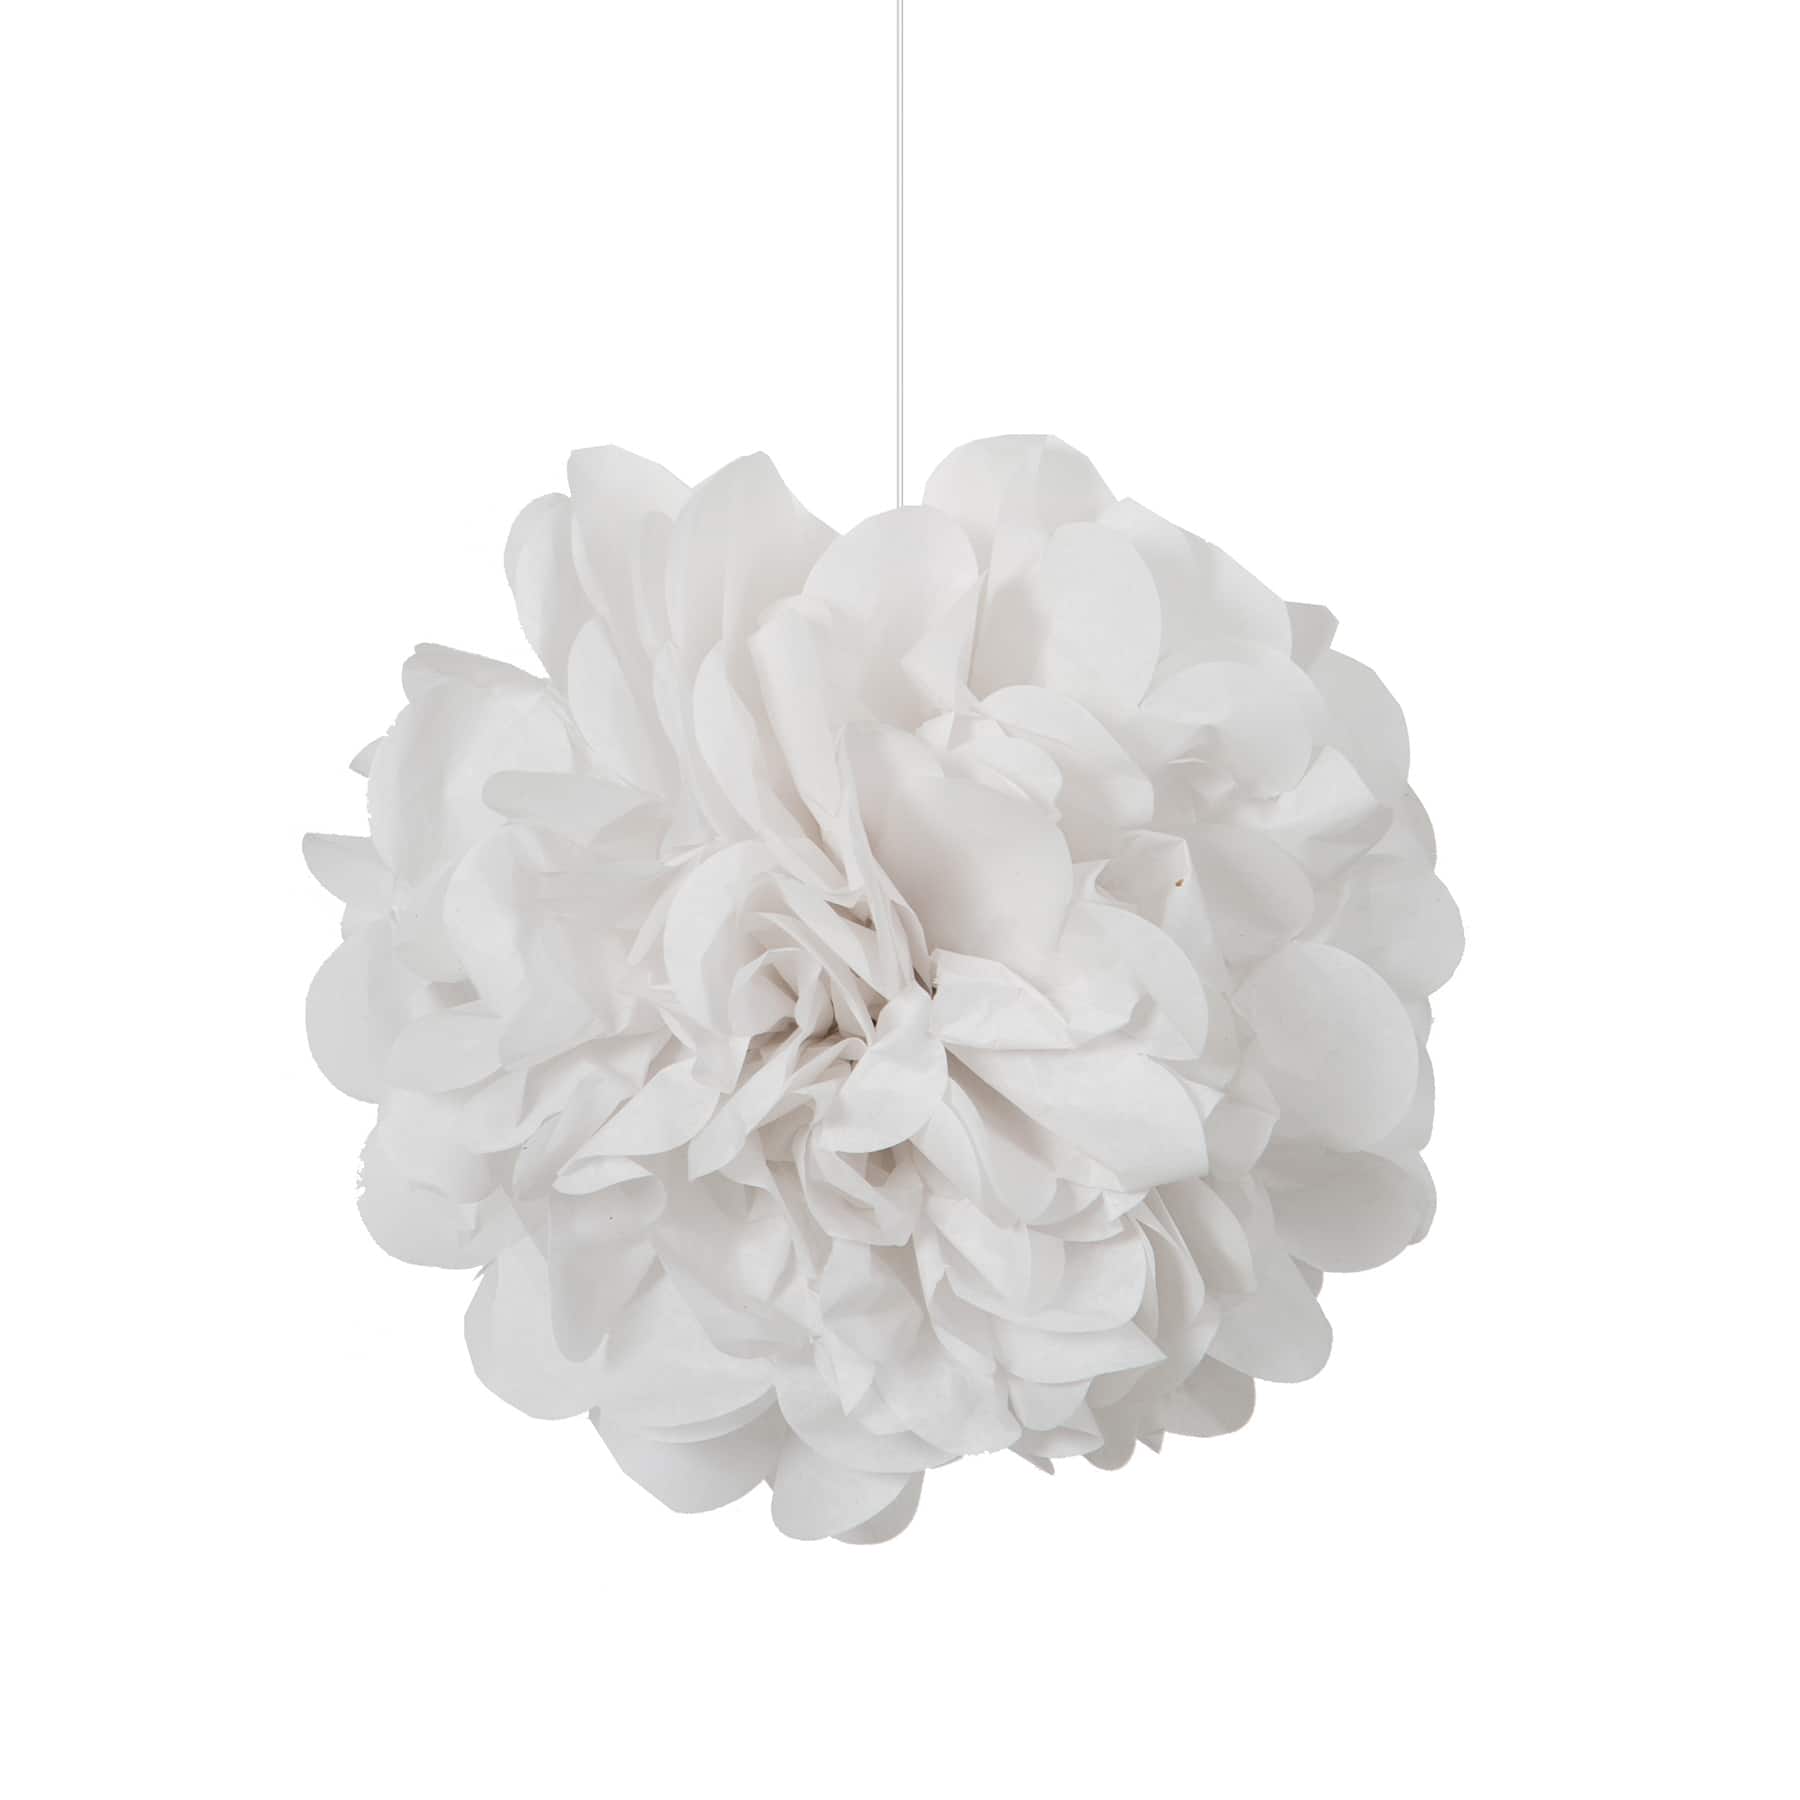 Tissue Paper Balls White Party Decorations